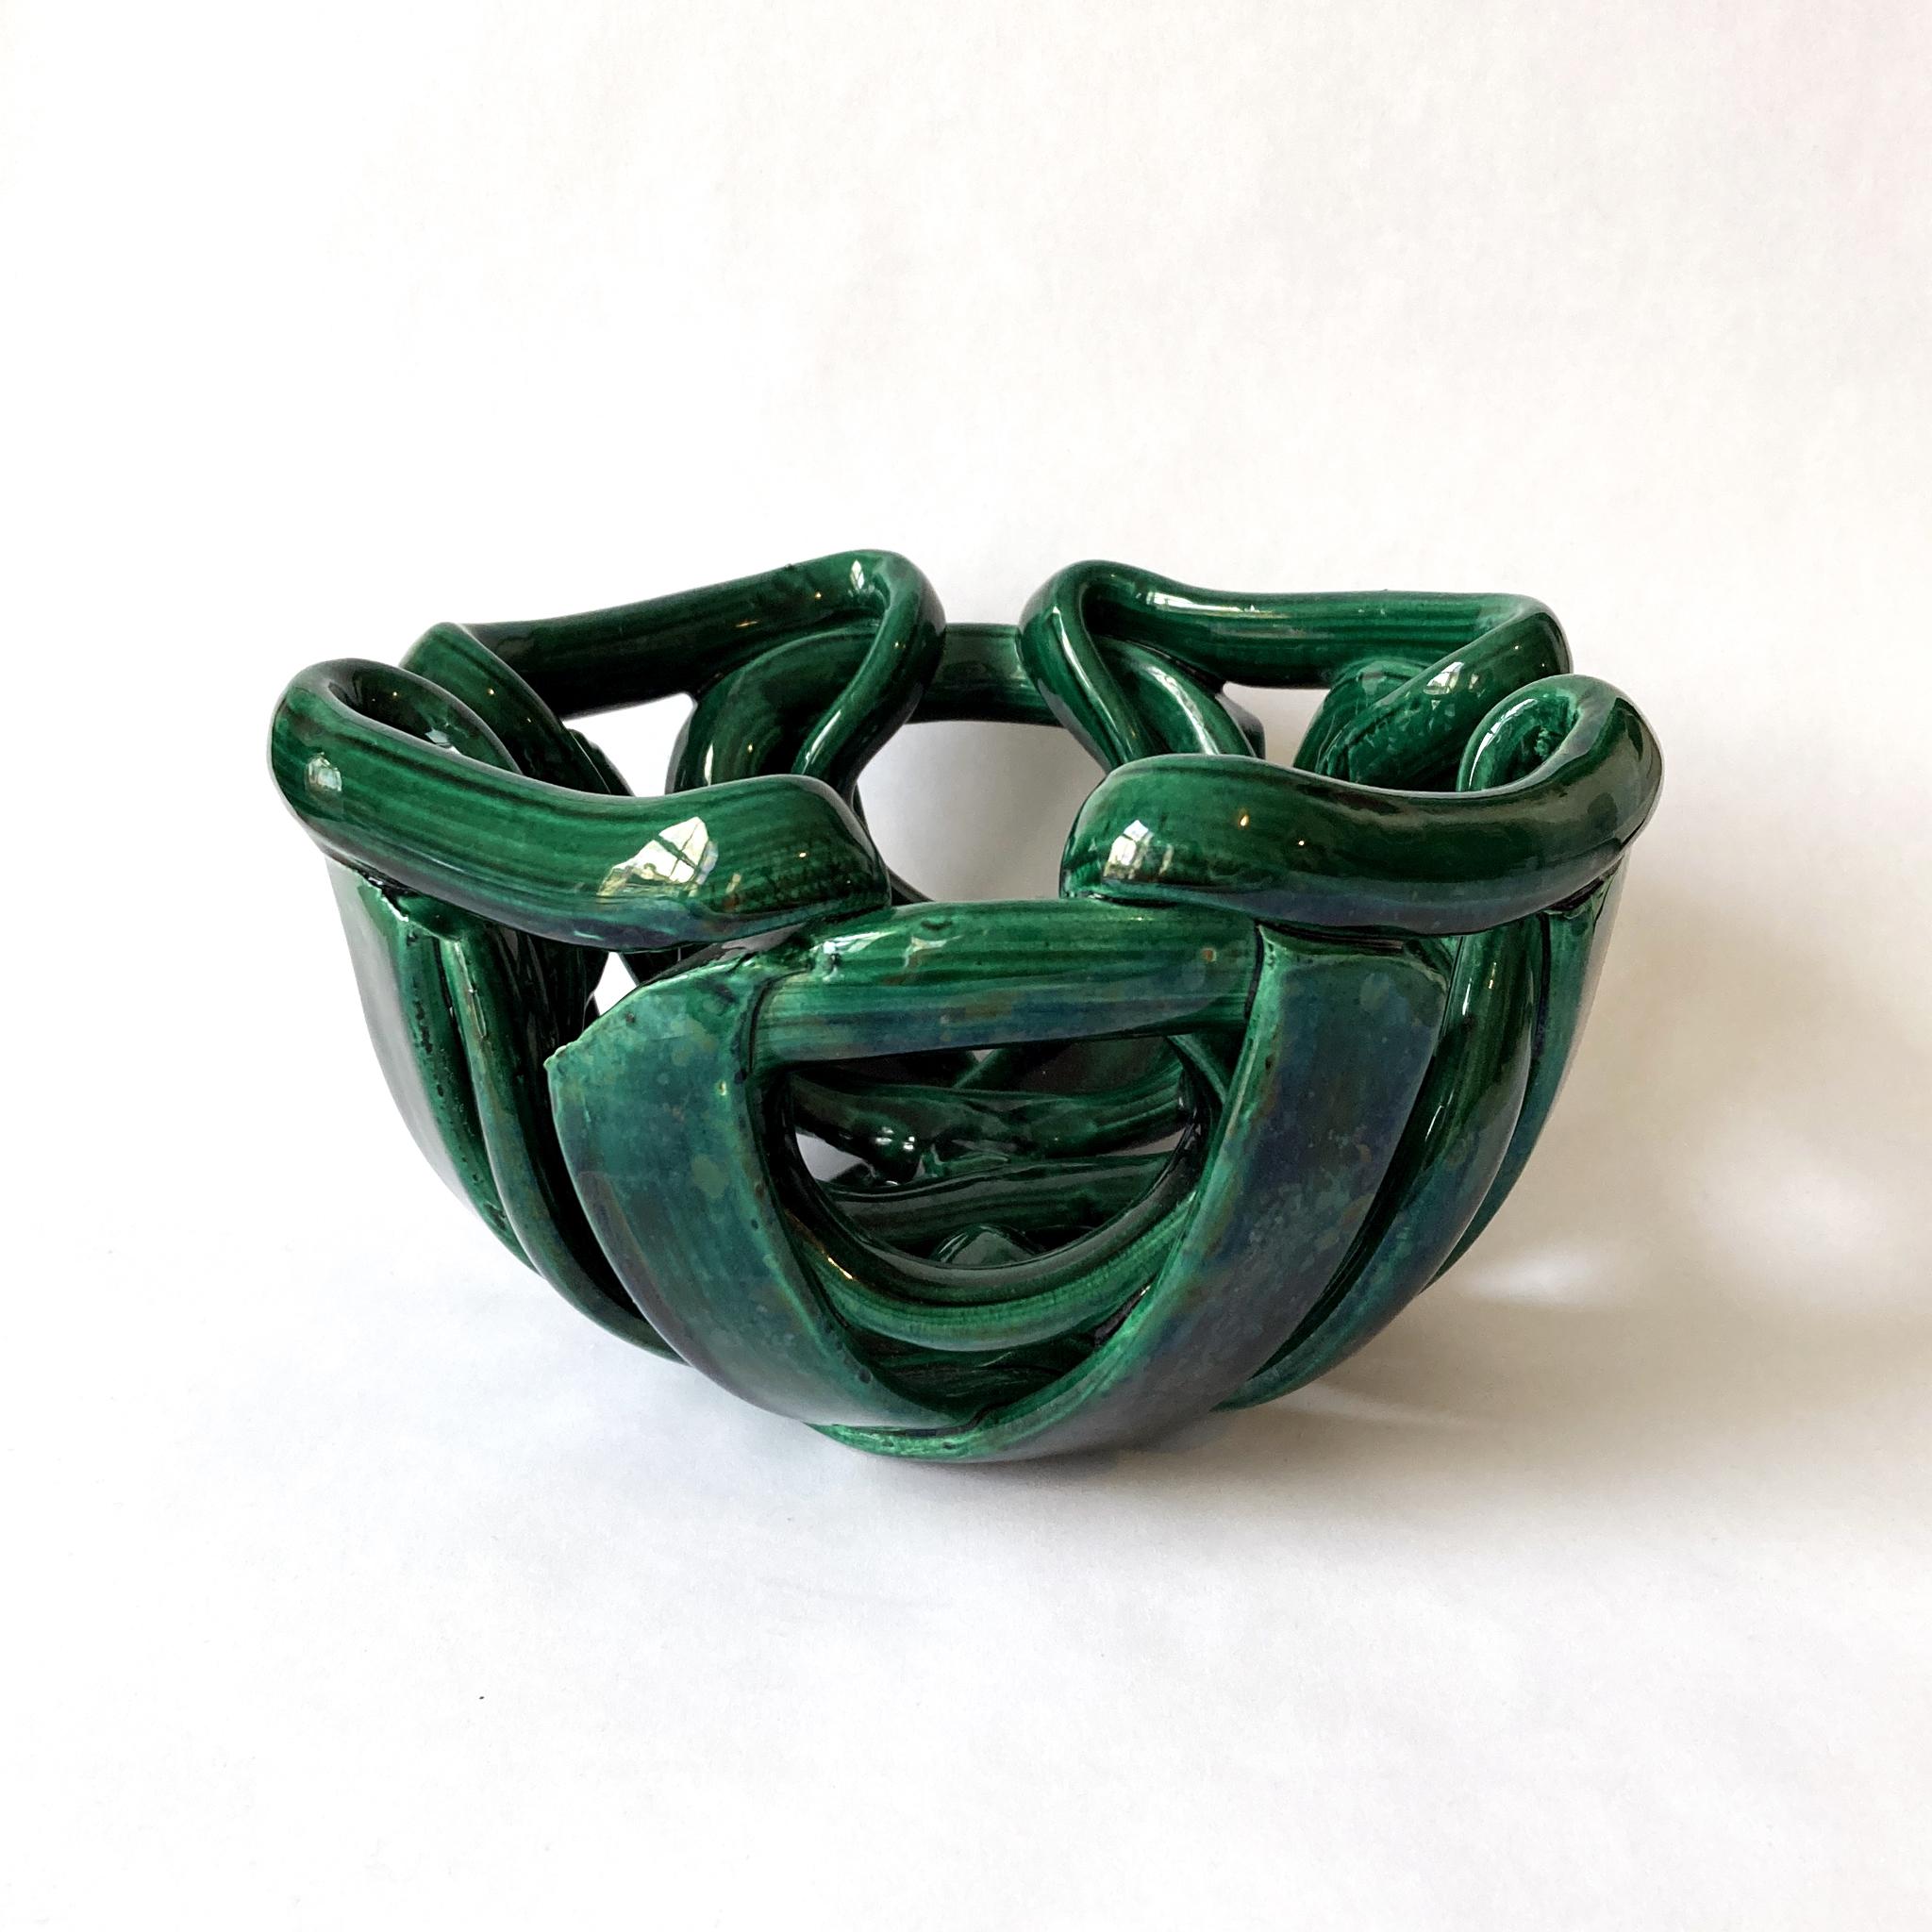 Stunning woven braided ceramic centerpiece bowl glazed in a wonderful shade of green. Great size for a coffee table or entryway. Very unusual abstract shape, pleasing from every angle. Not signed. In good vintage condition, see condition details.